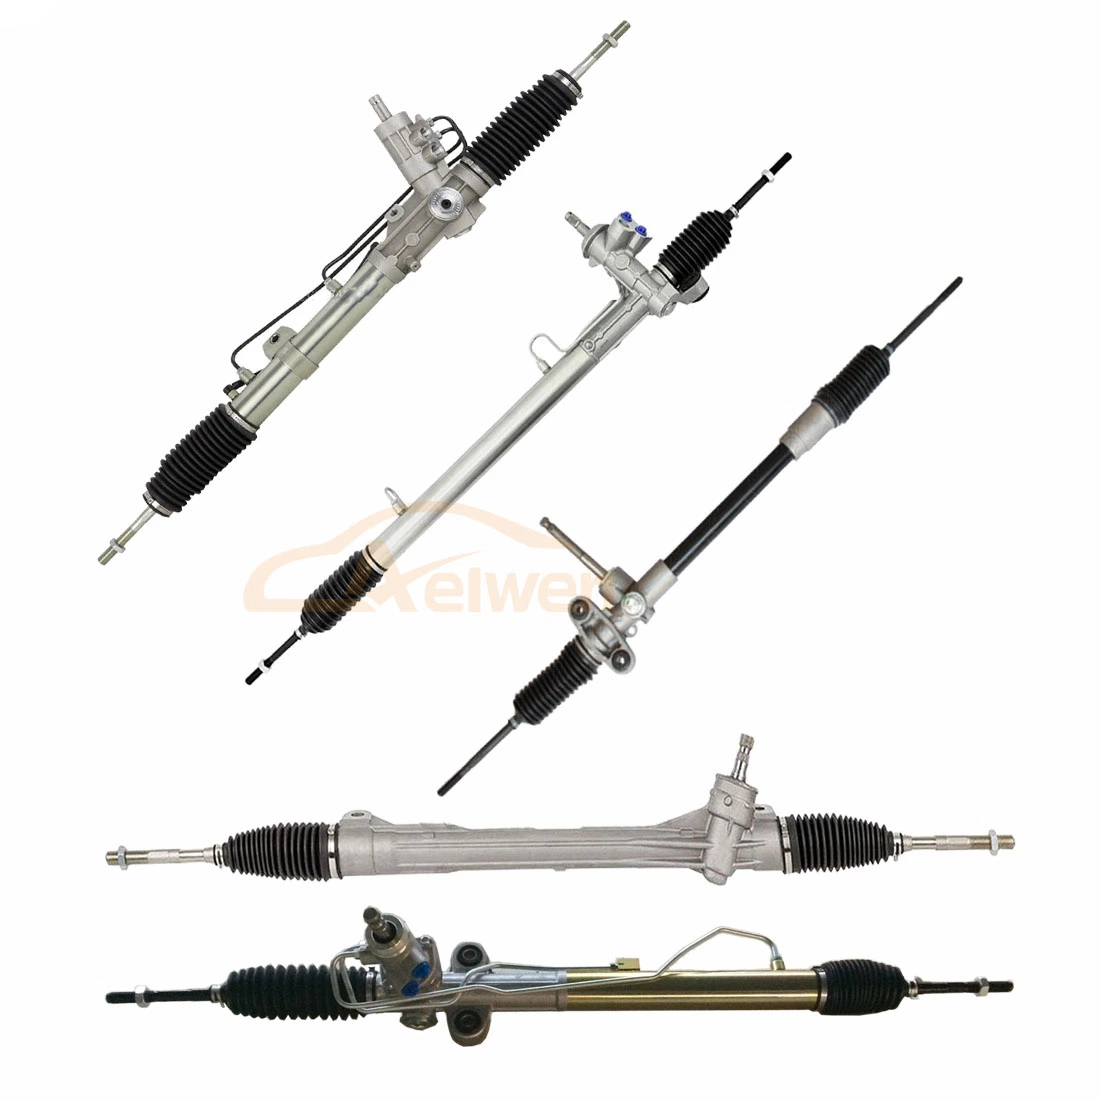 Aelwen LHD Hydraulic Auto Power Steering Gear Mechanical Steering Rack Car Steering Rack and Pinion Fit for Chevrolet Ford Nissan Audi VW Toyota